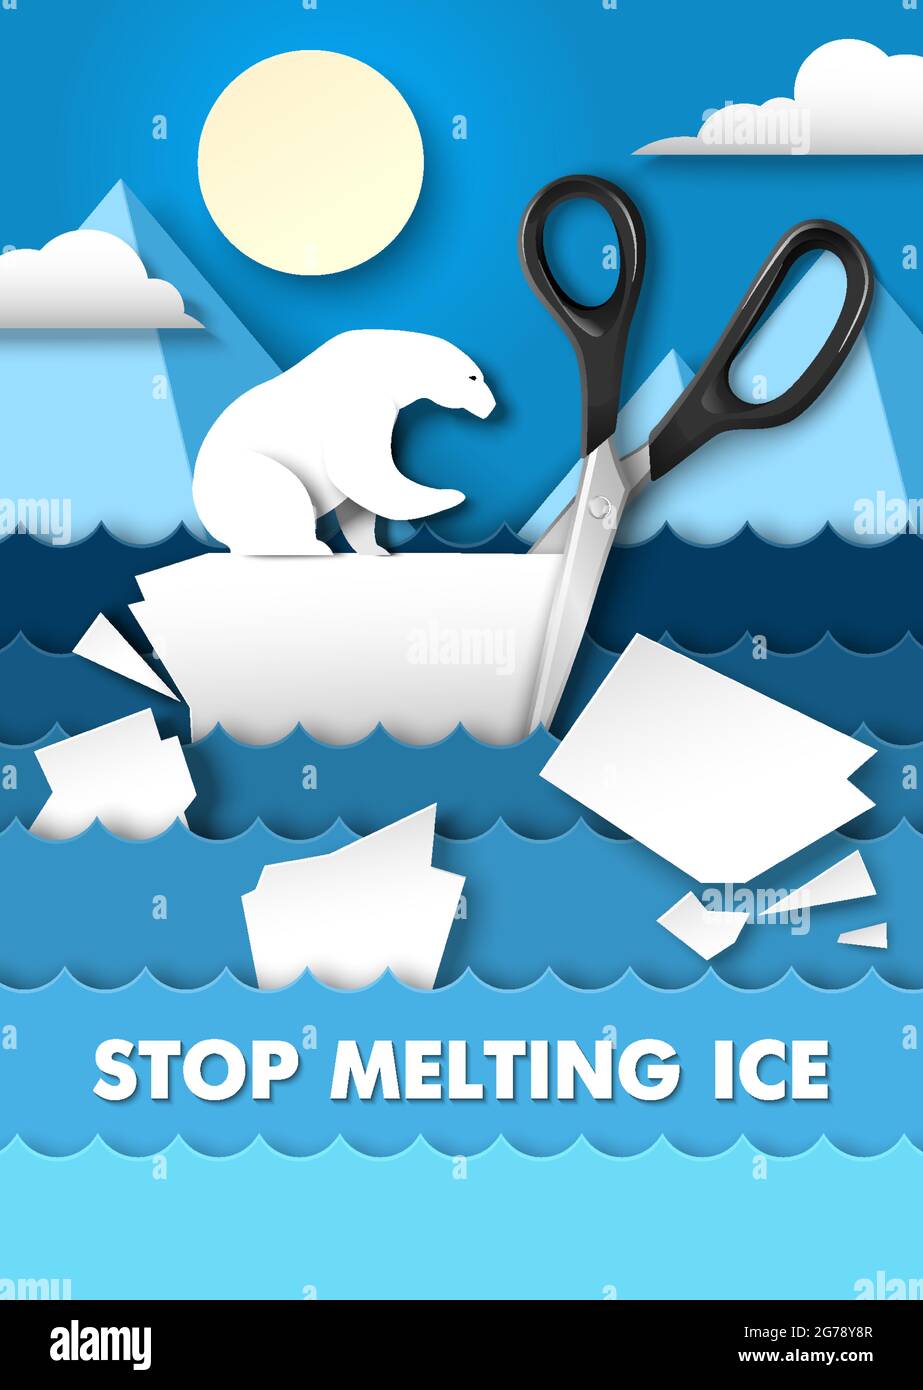 Stop melting ice poster design template. Vector illustration in paper art style. Global warming ecology problem. Stock Vector